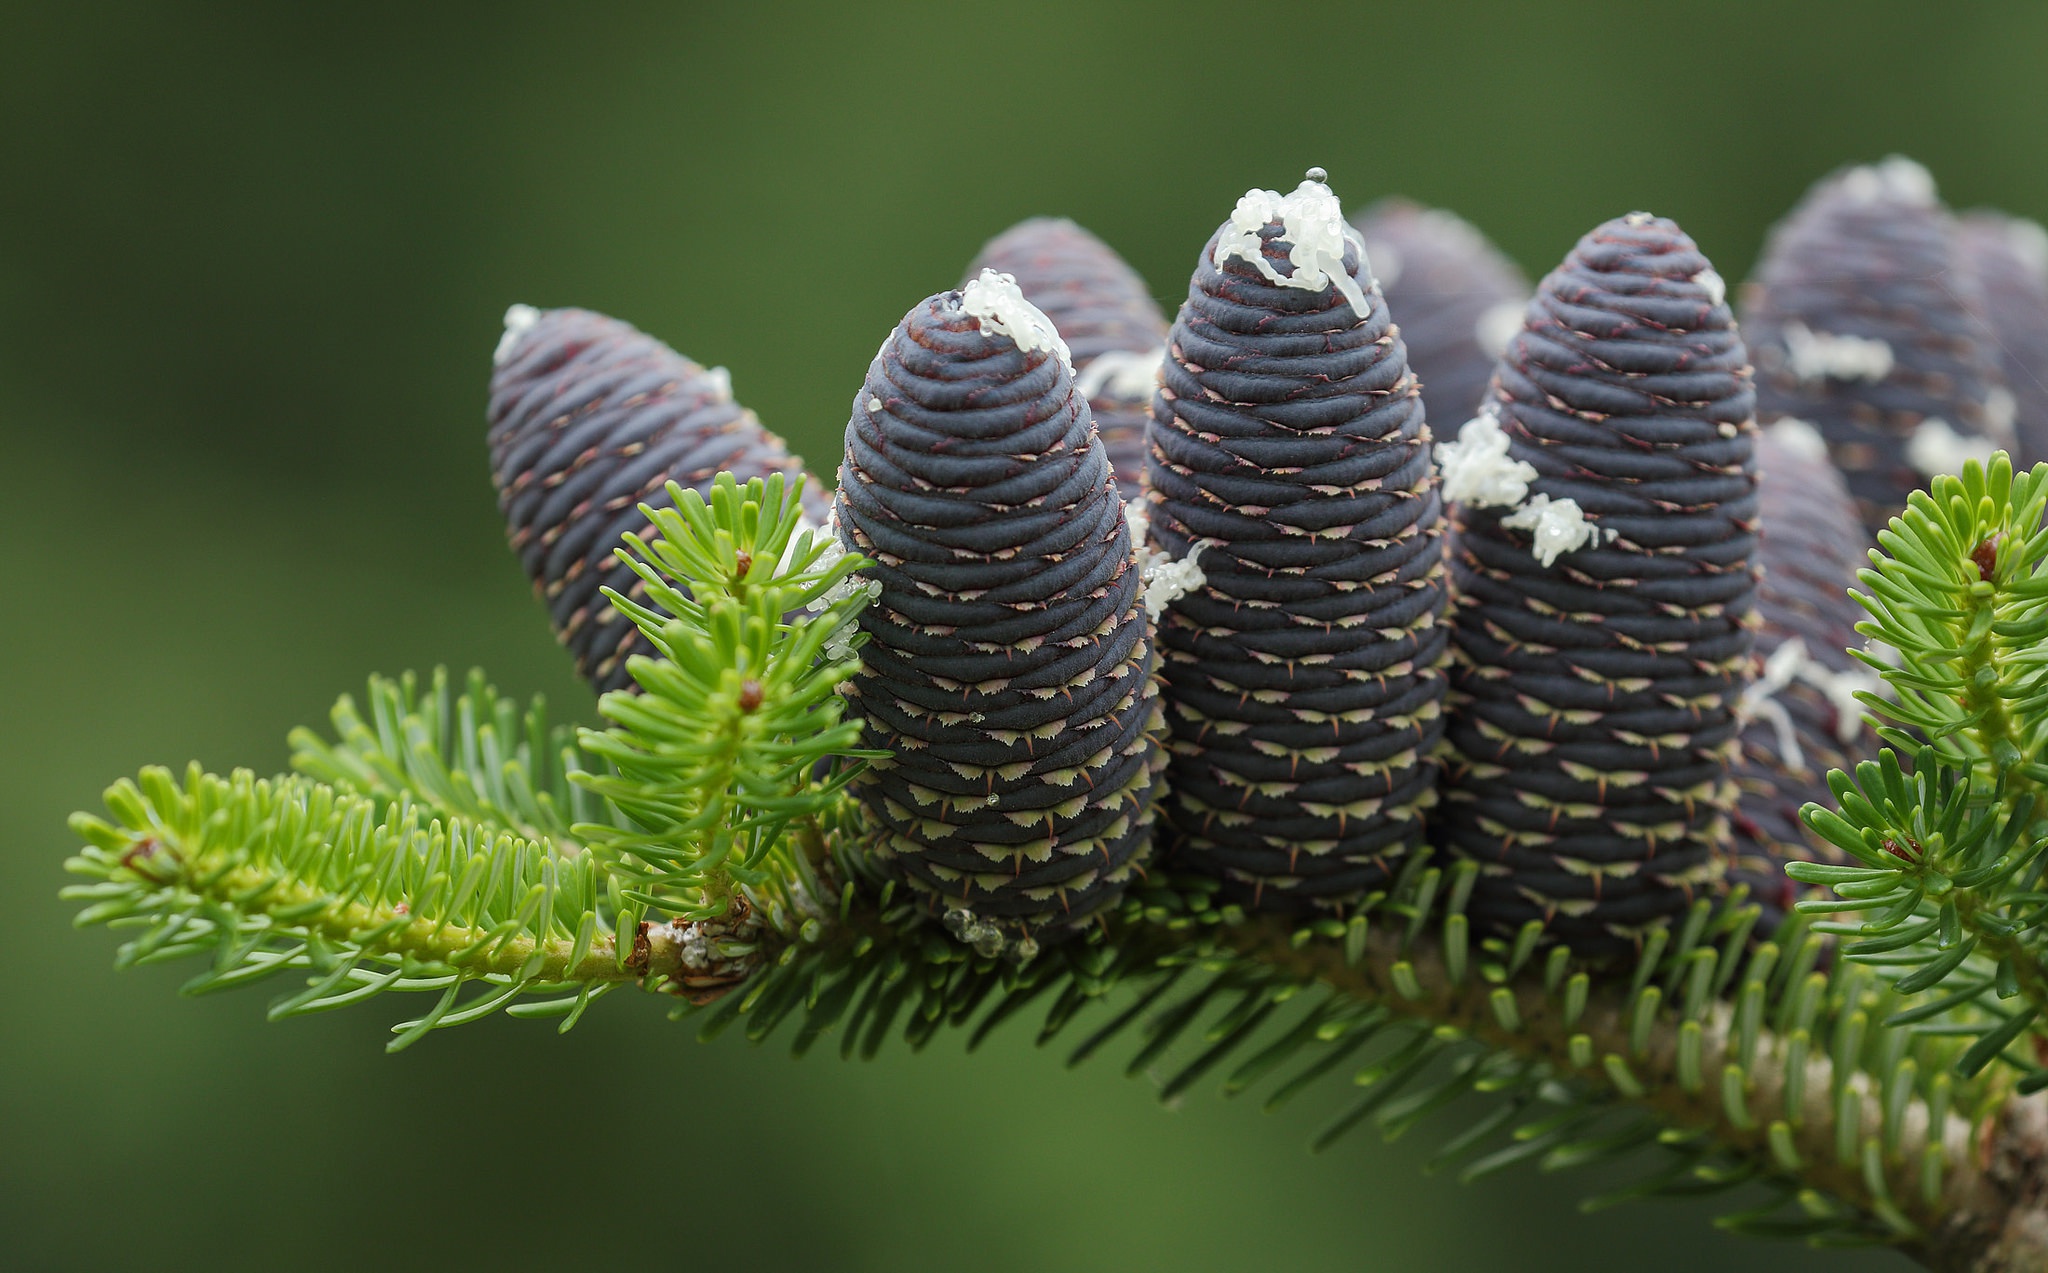 Windows Backgrounds earth, close up, branch, fir, macro, pine cone